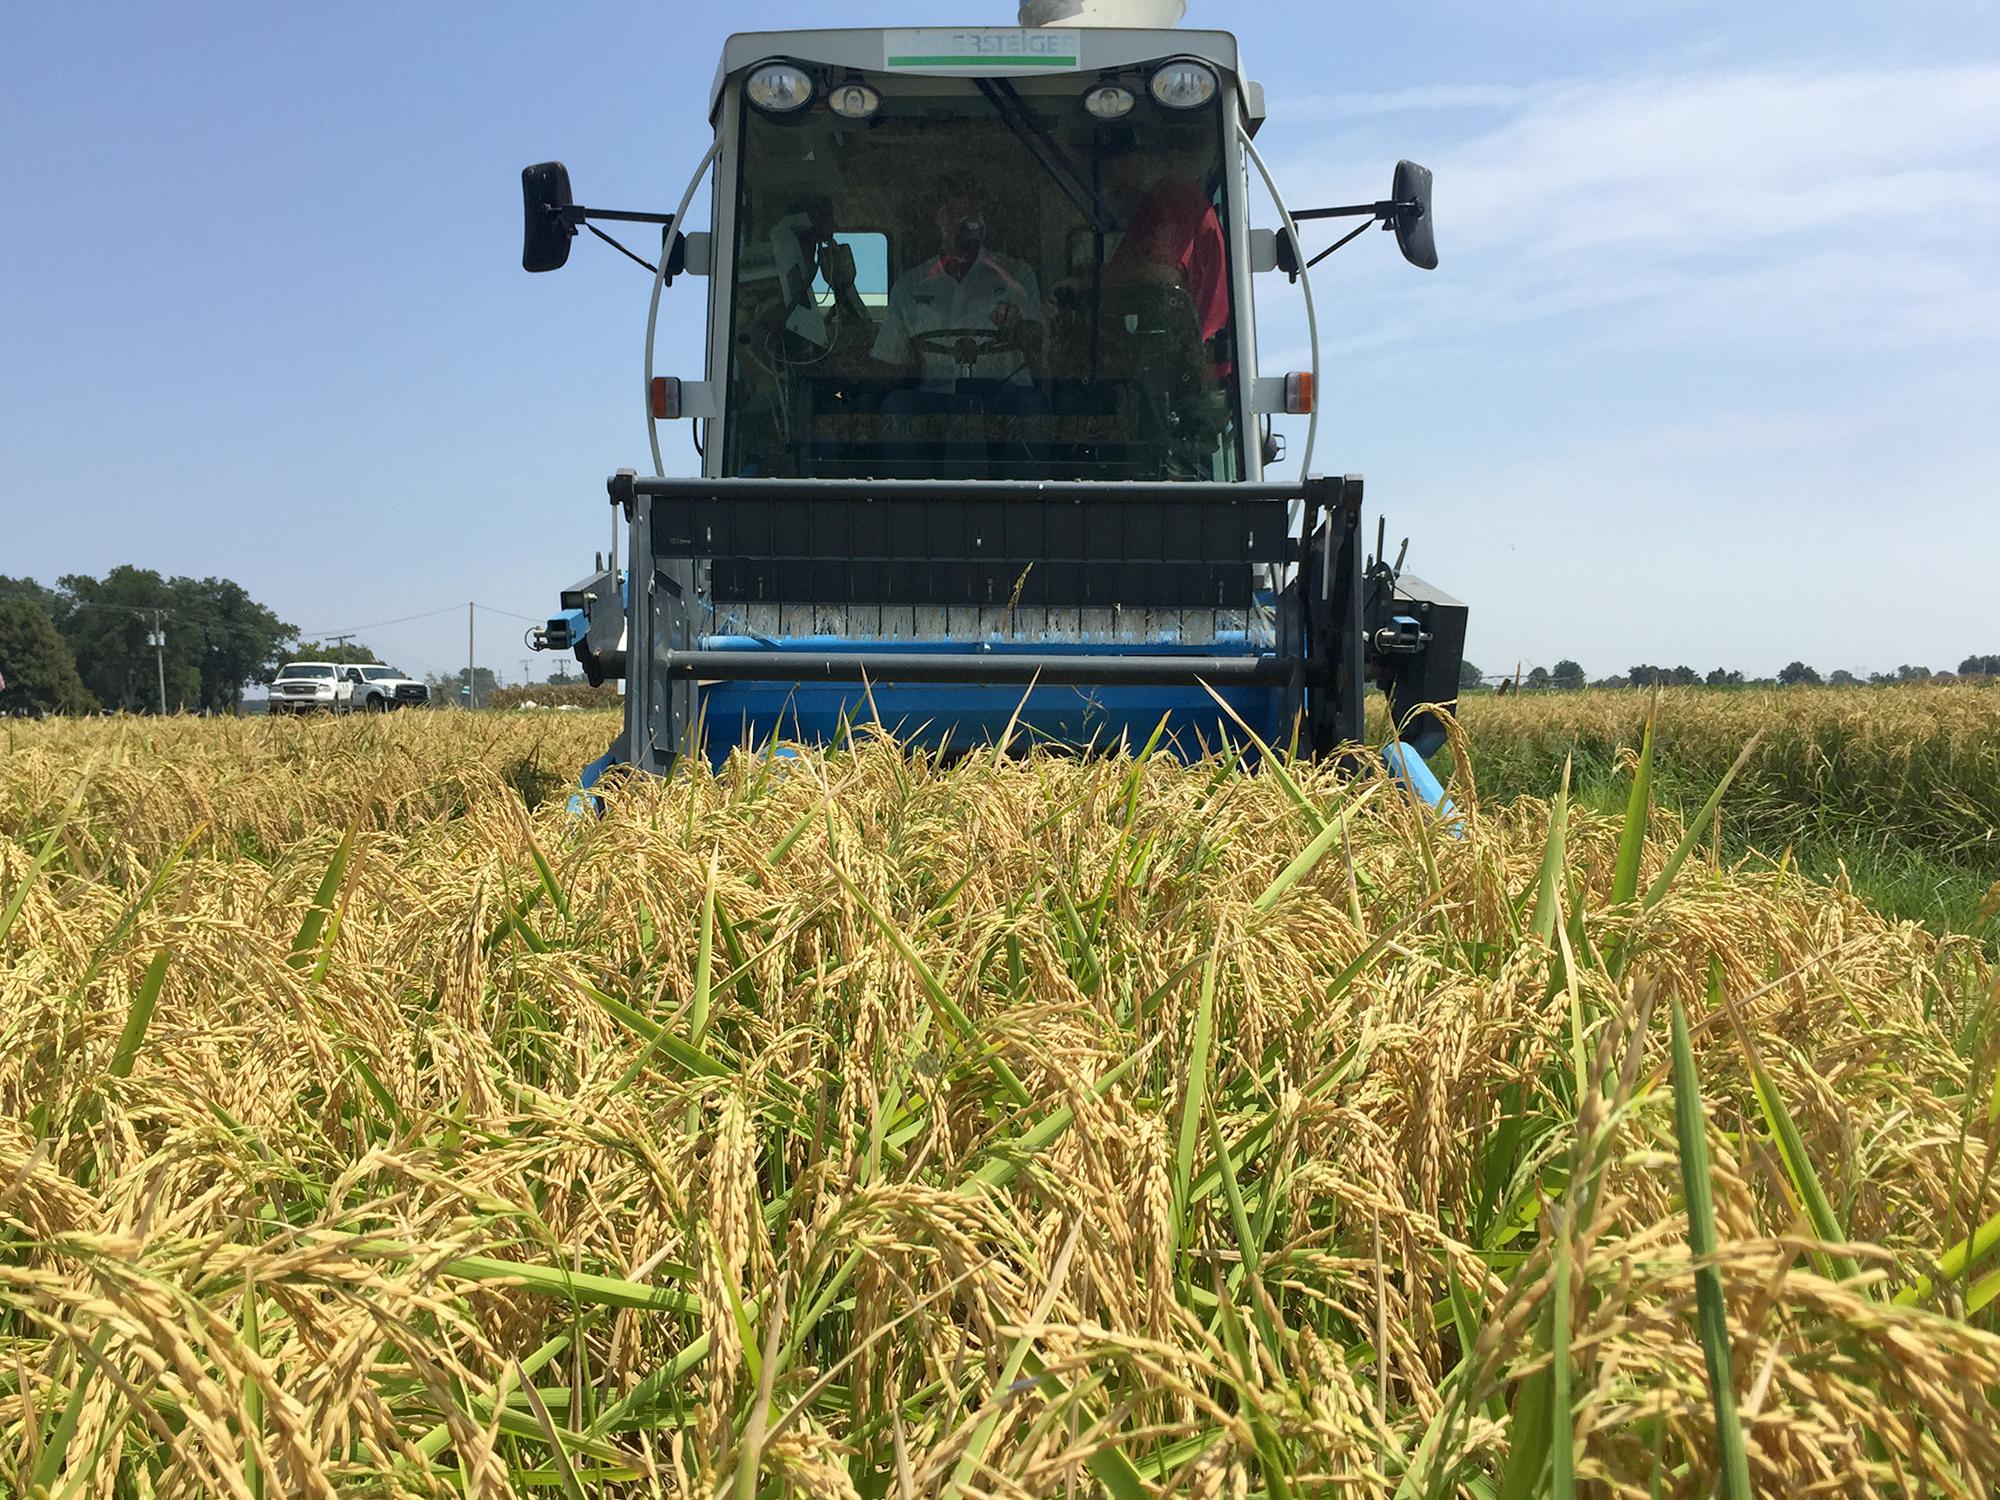 Workers harvest rice on Aug. 24, 2015, at the Mississippi State University Delta Research and Extension Center in Stoneville, Mississippi. (Photo by MSU Delta Research and Extension Center/Bobby Golden)